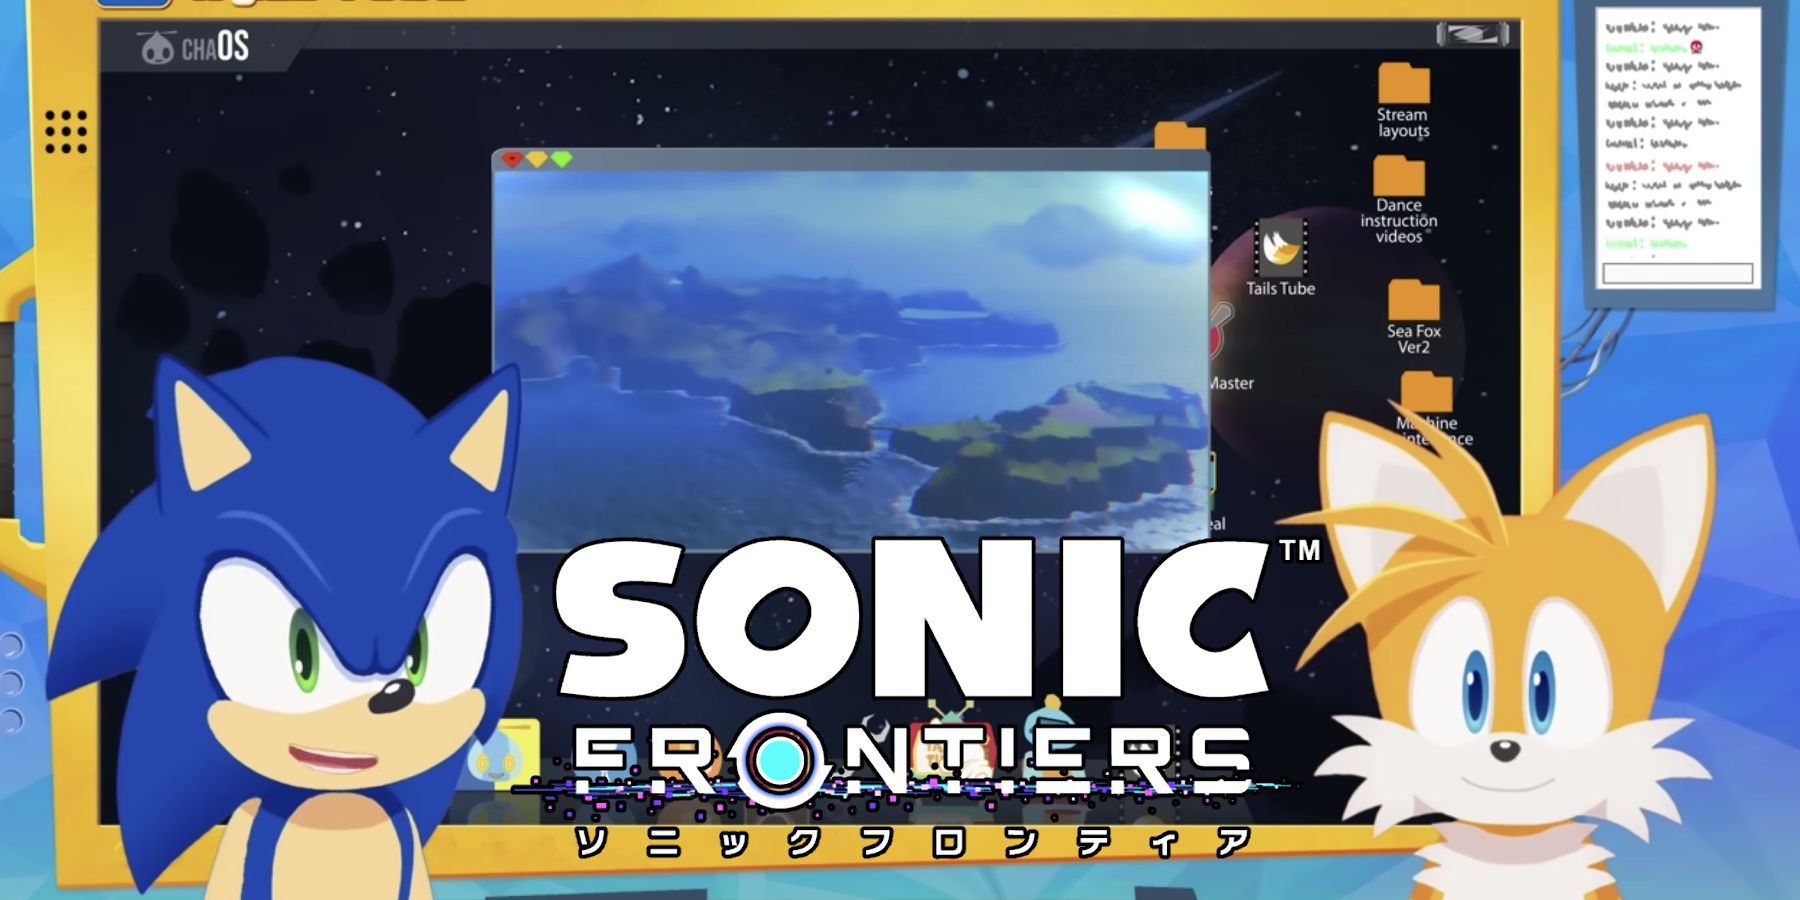 tailstube-starfall-islands-with-sonic-frontiers-logo